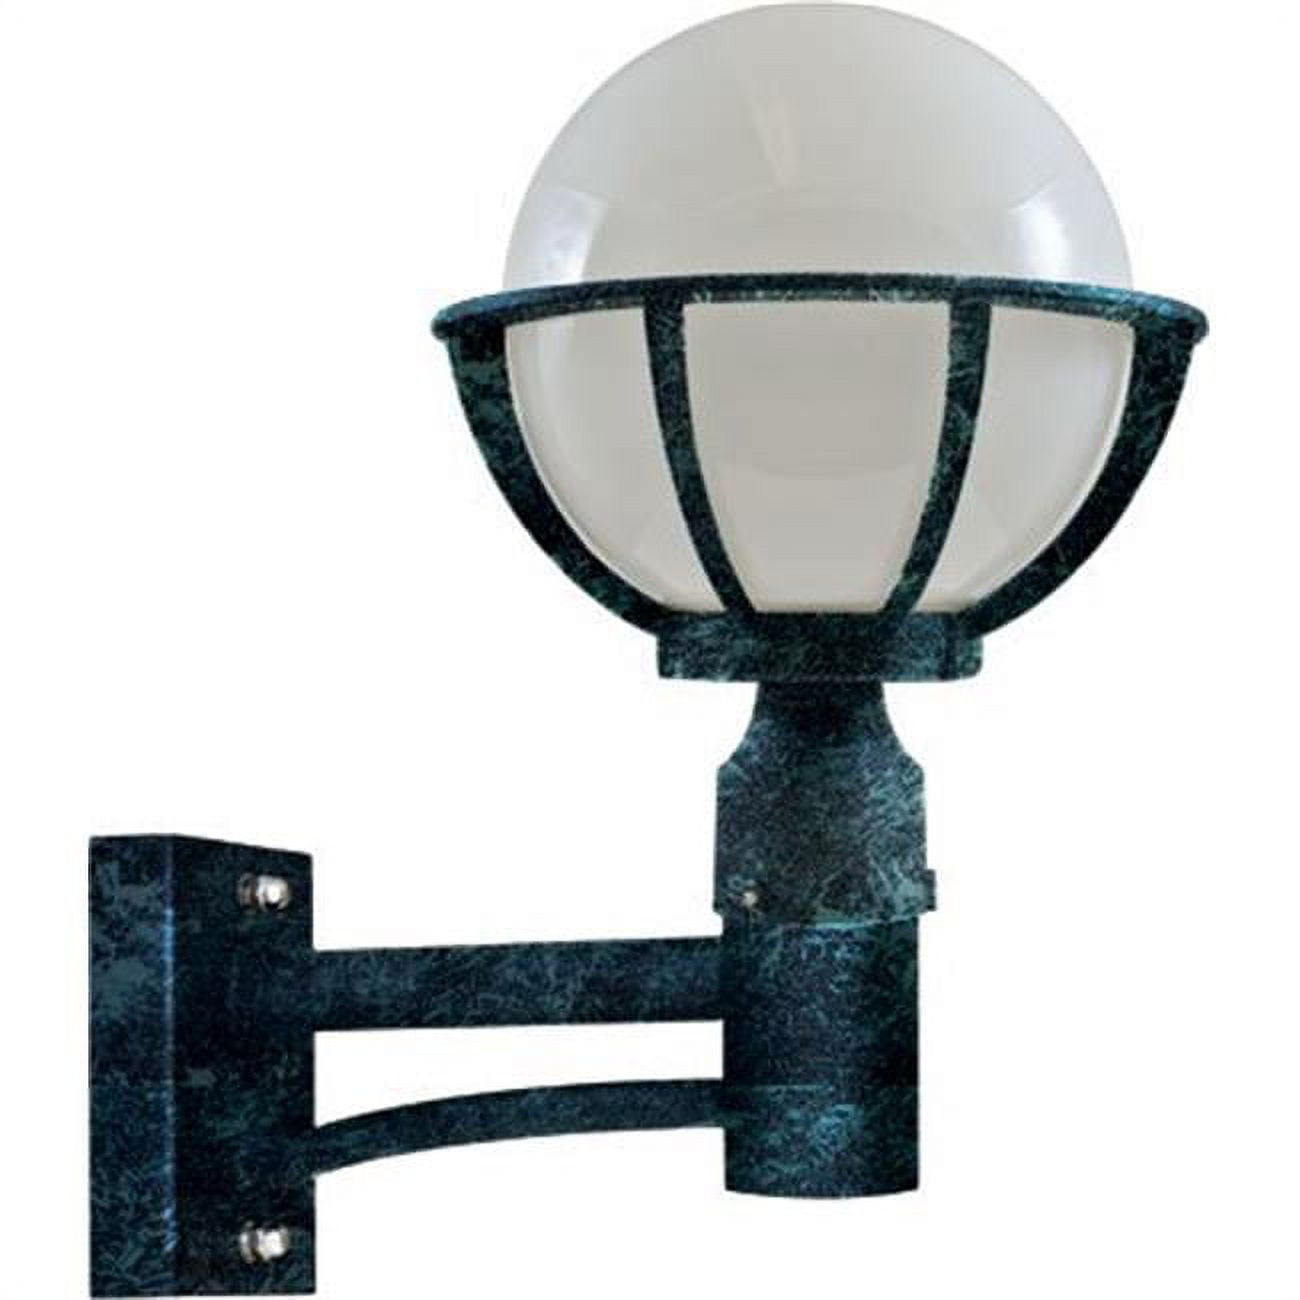 Picture of Dabmar Lighting GM266-VG 13 watt DL-S13-GU24 120 V Cast Aluminum 10 in. Globe Wall Fixture with Pre-Wired, Black & Verde Green